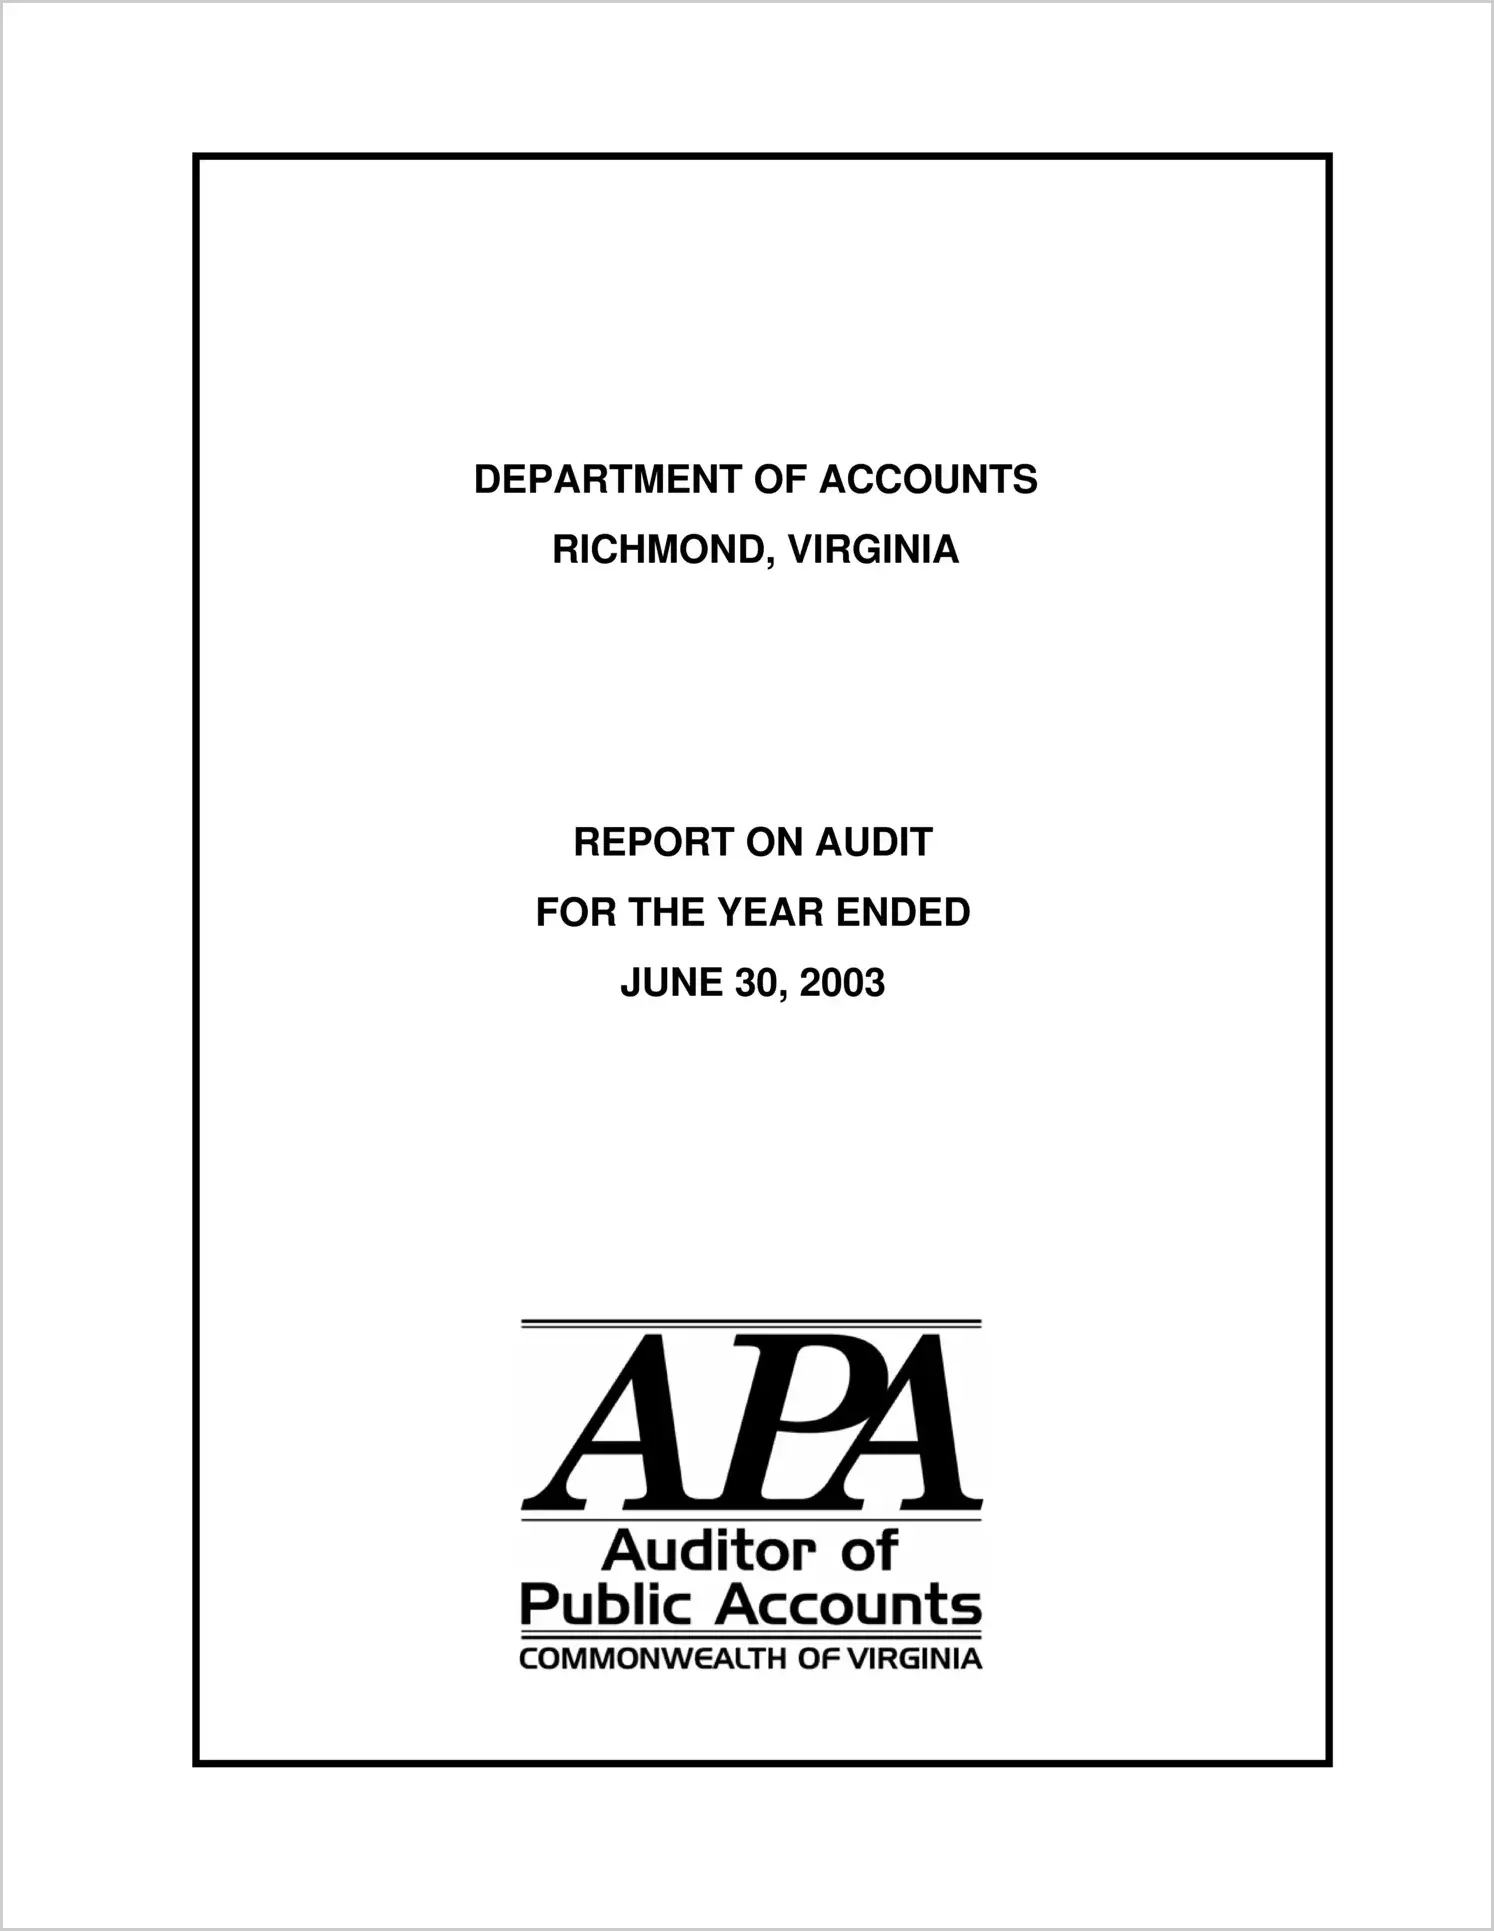 Department of Accounts for the year ended June 30, 2003